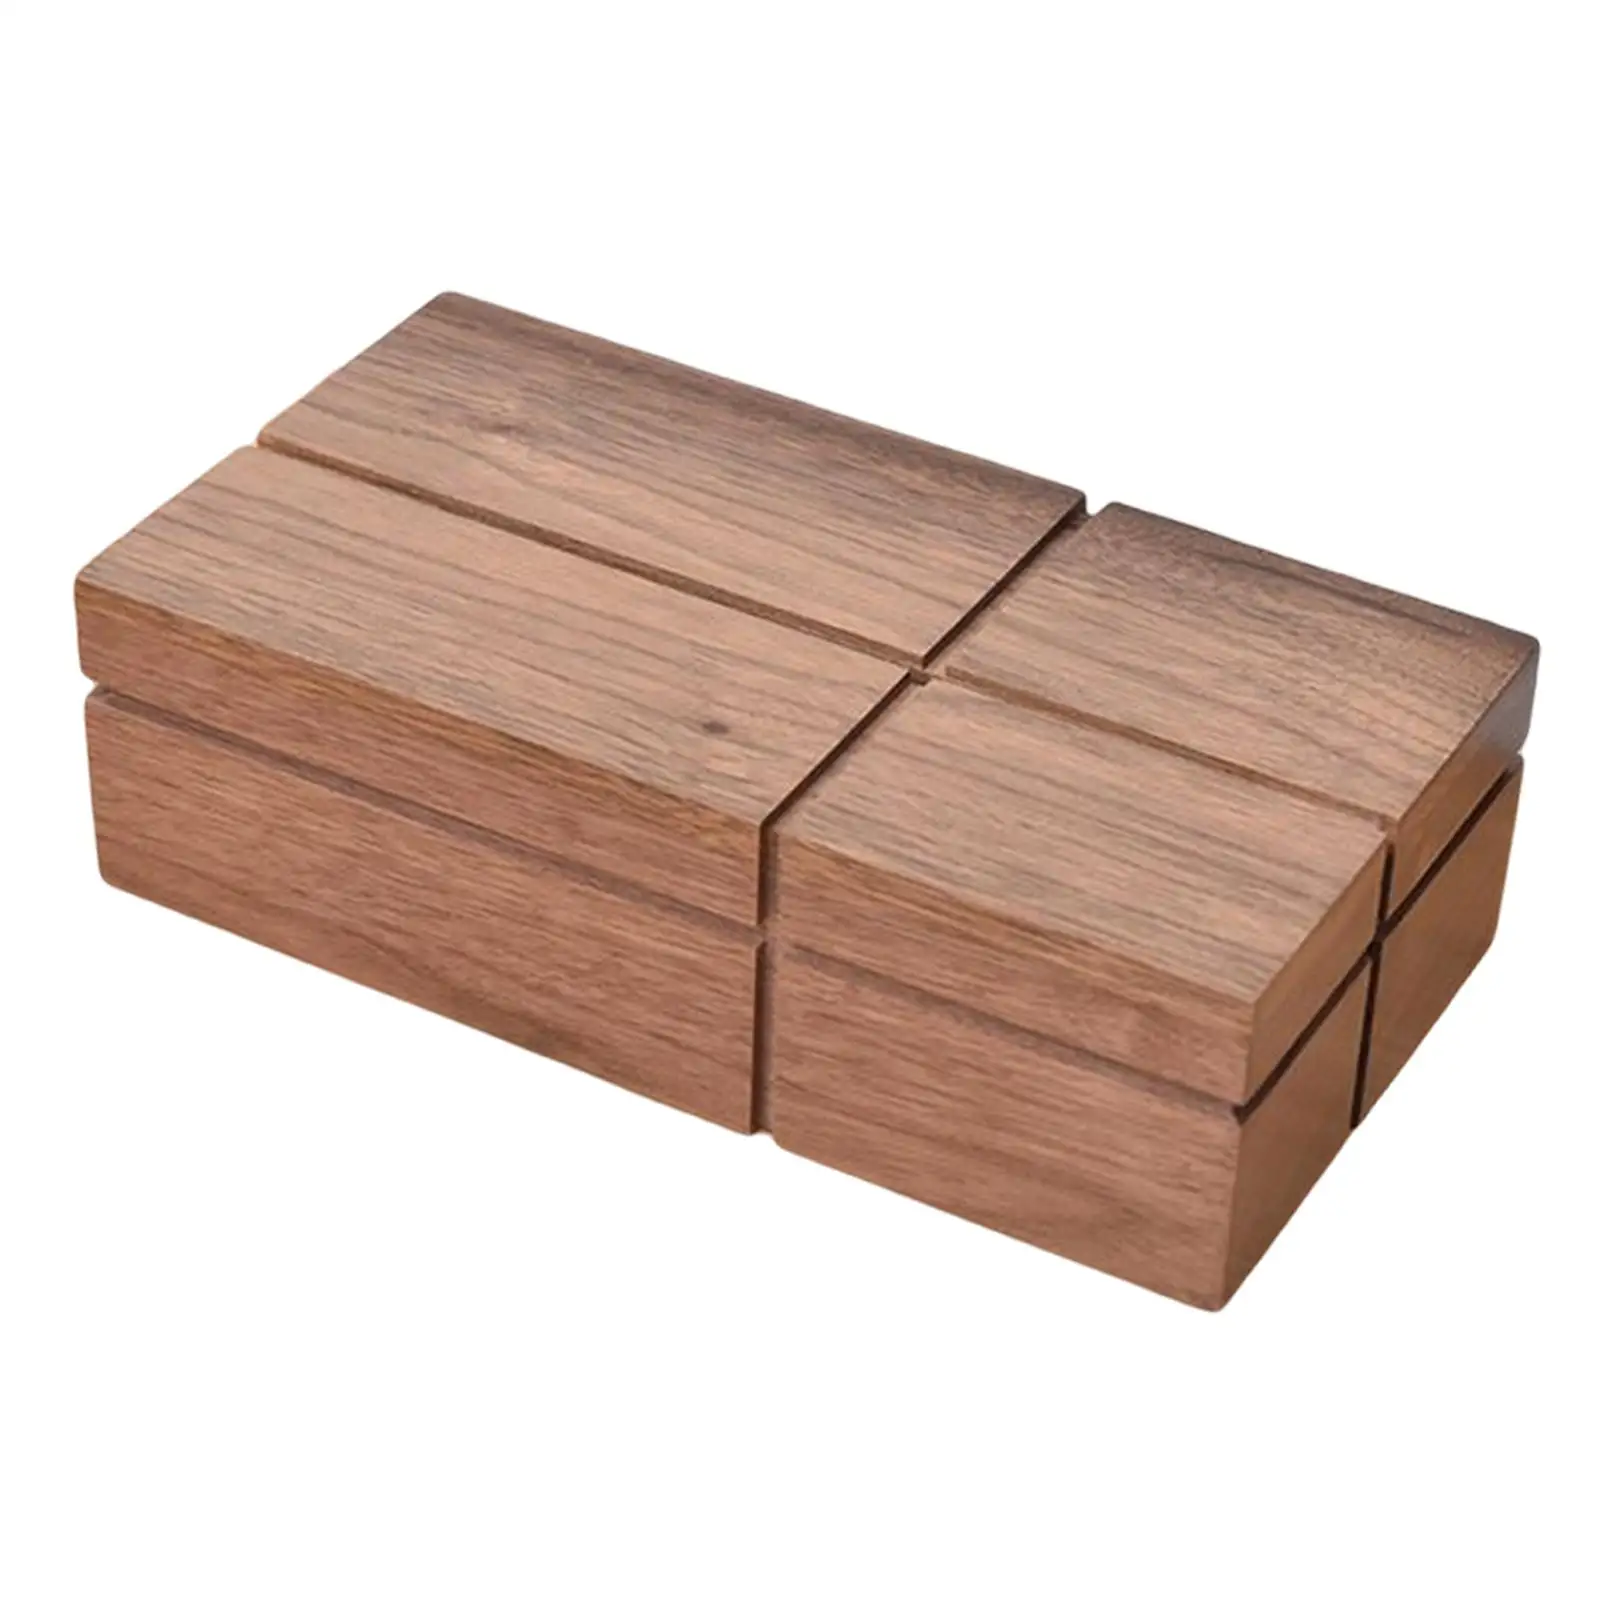 Wooden Napkin Holder tissue Holders Facial Tissue Holder Case Tissue Box Facial Tissues Container for Cupboard Car